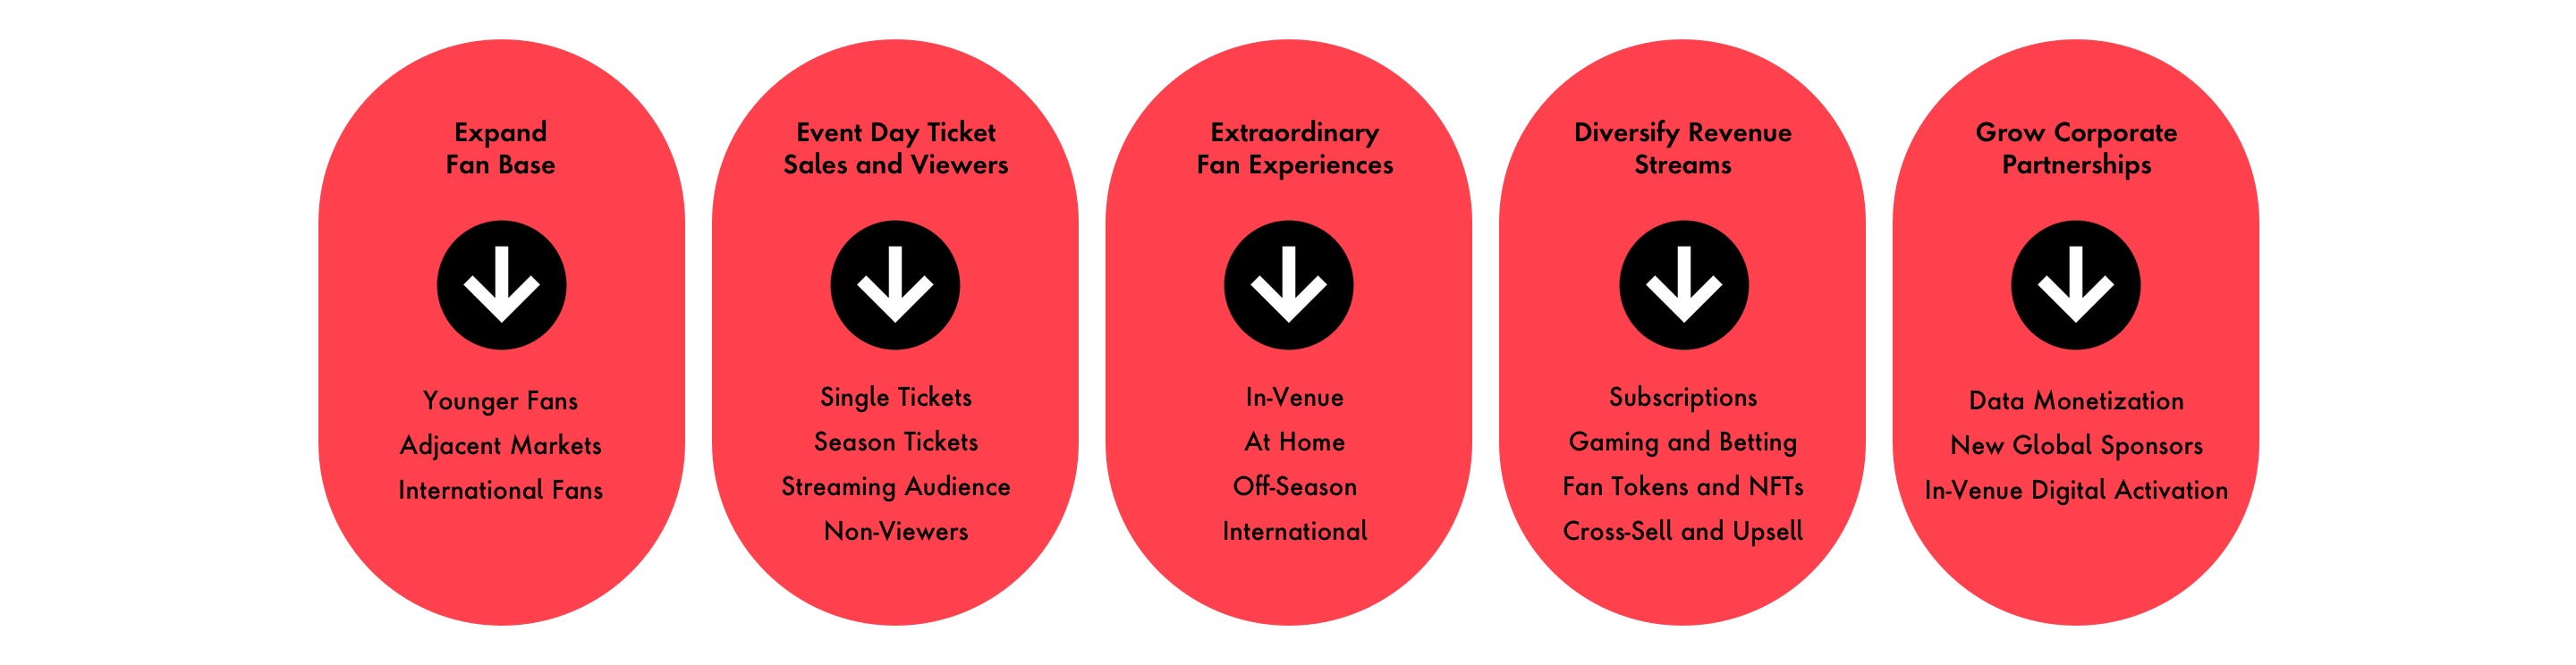 Graphic depicting five pillars of digital transformation for the Sports industry: 1. Expanding your fan base, 2. Selling event day tickets to an even wider audience, 3. Providing extraordinary fan experiences both in-venue and on mobile devices, 4.Diversifying revenue streams to upsell and cross-sell fans, and 5. Growing corporate partnerships to monetize data with in-venue activations and global sponsorships. 